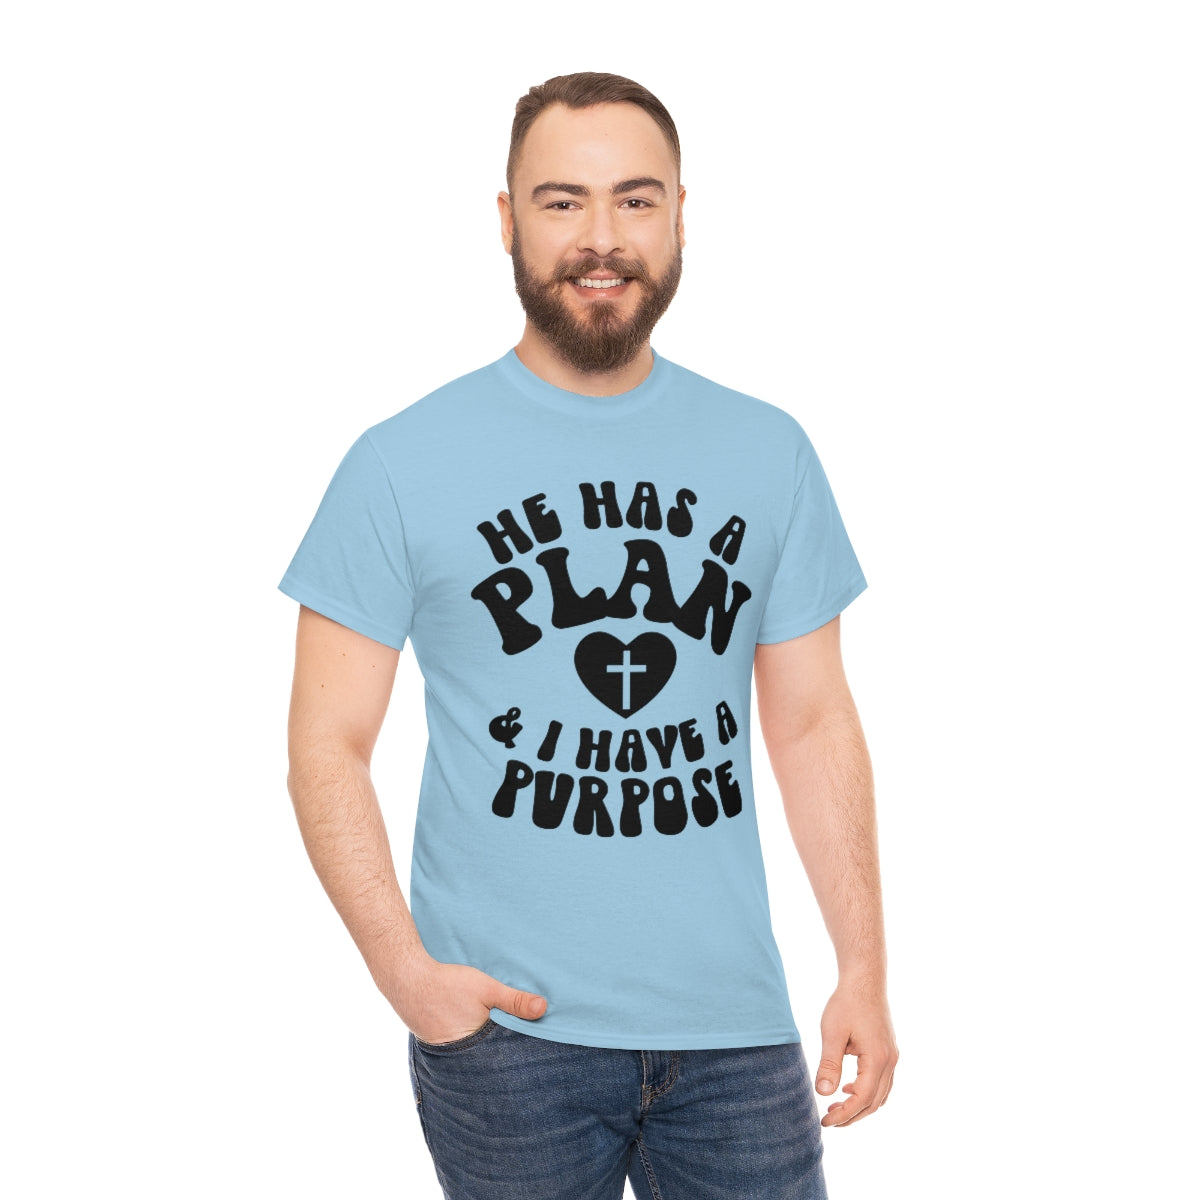 He has a plan and I have a purpose Unisex Heavy Cotton Tee